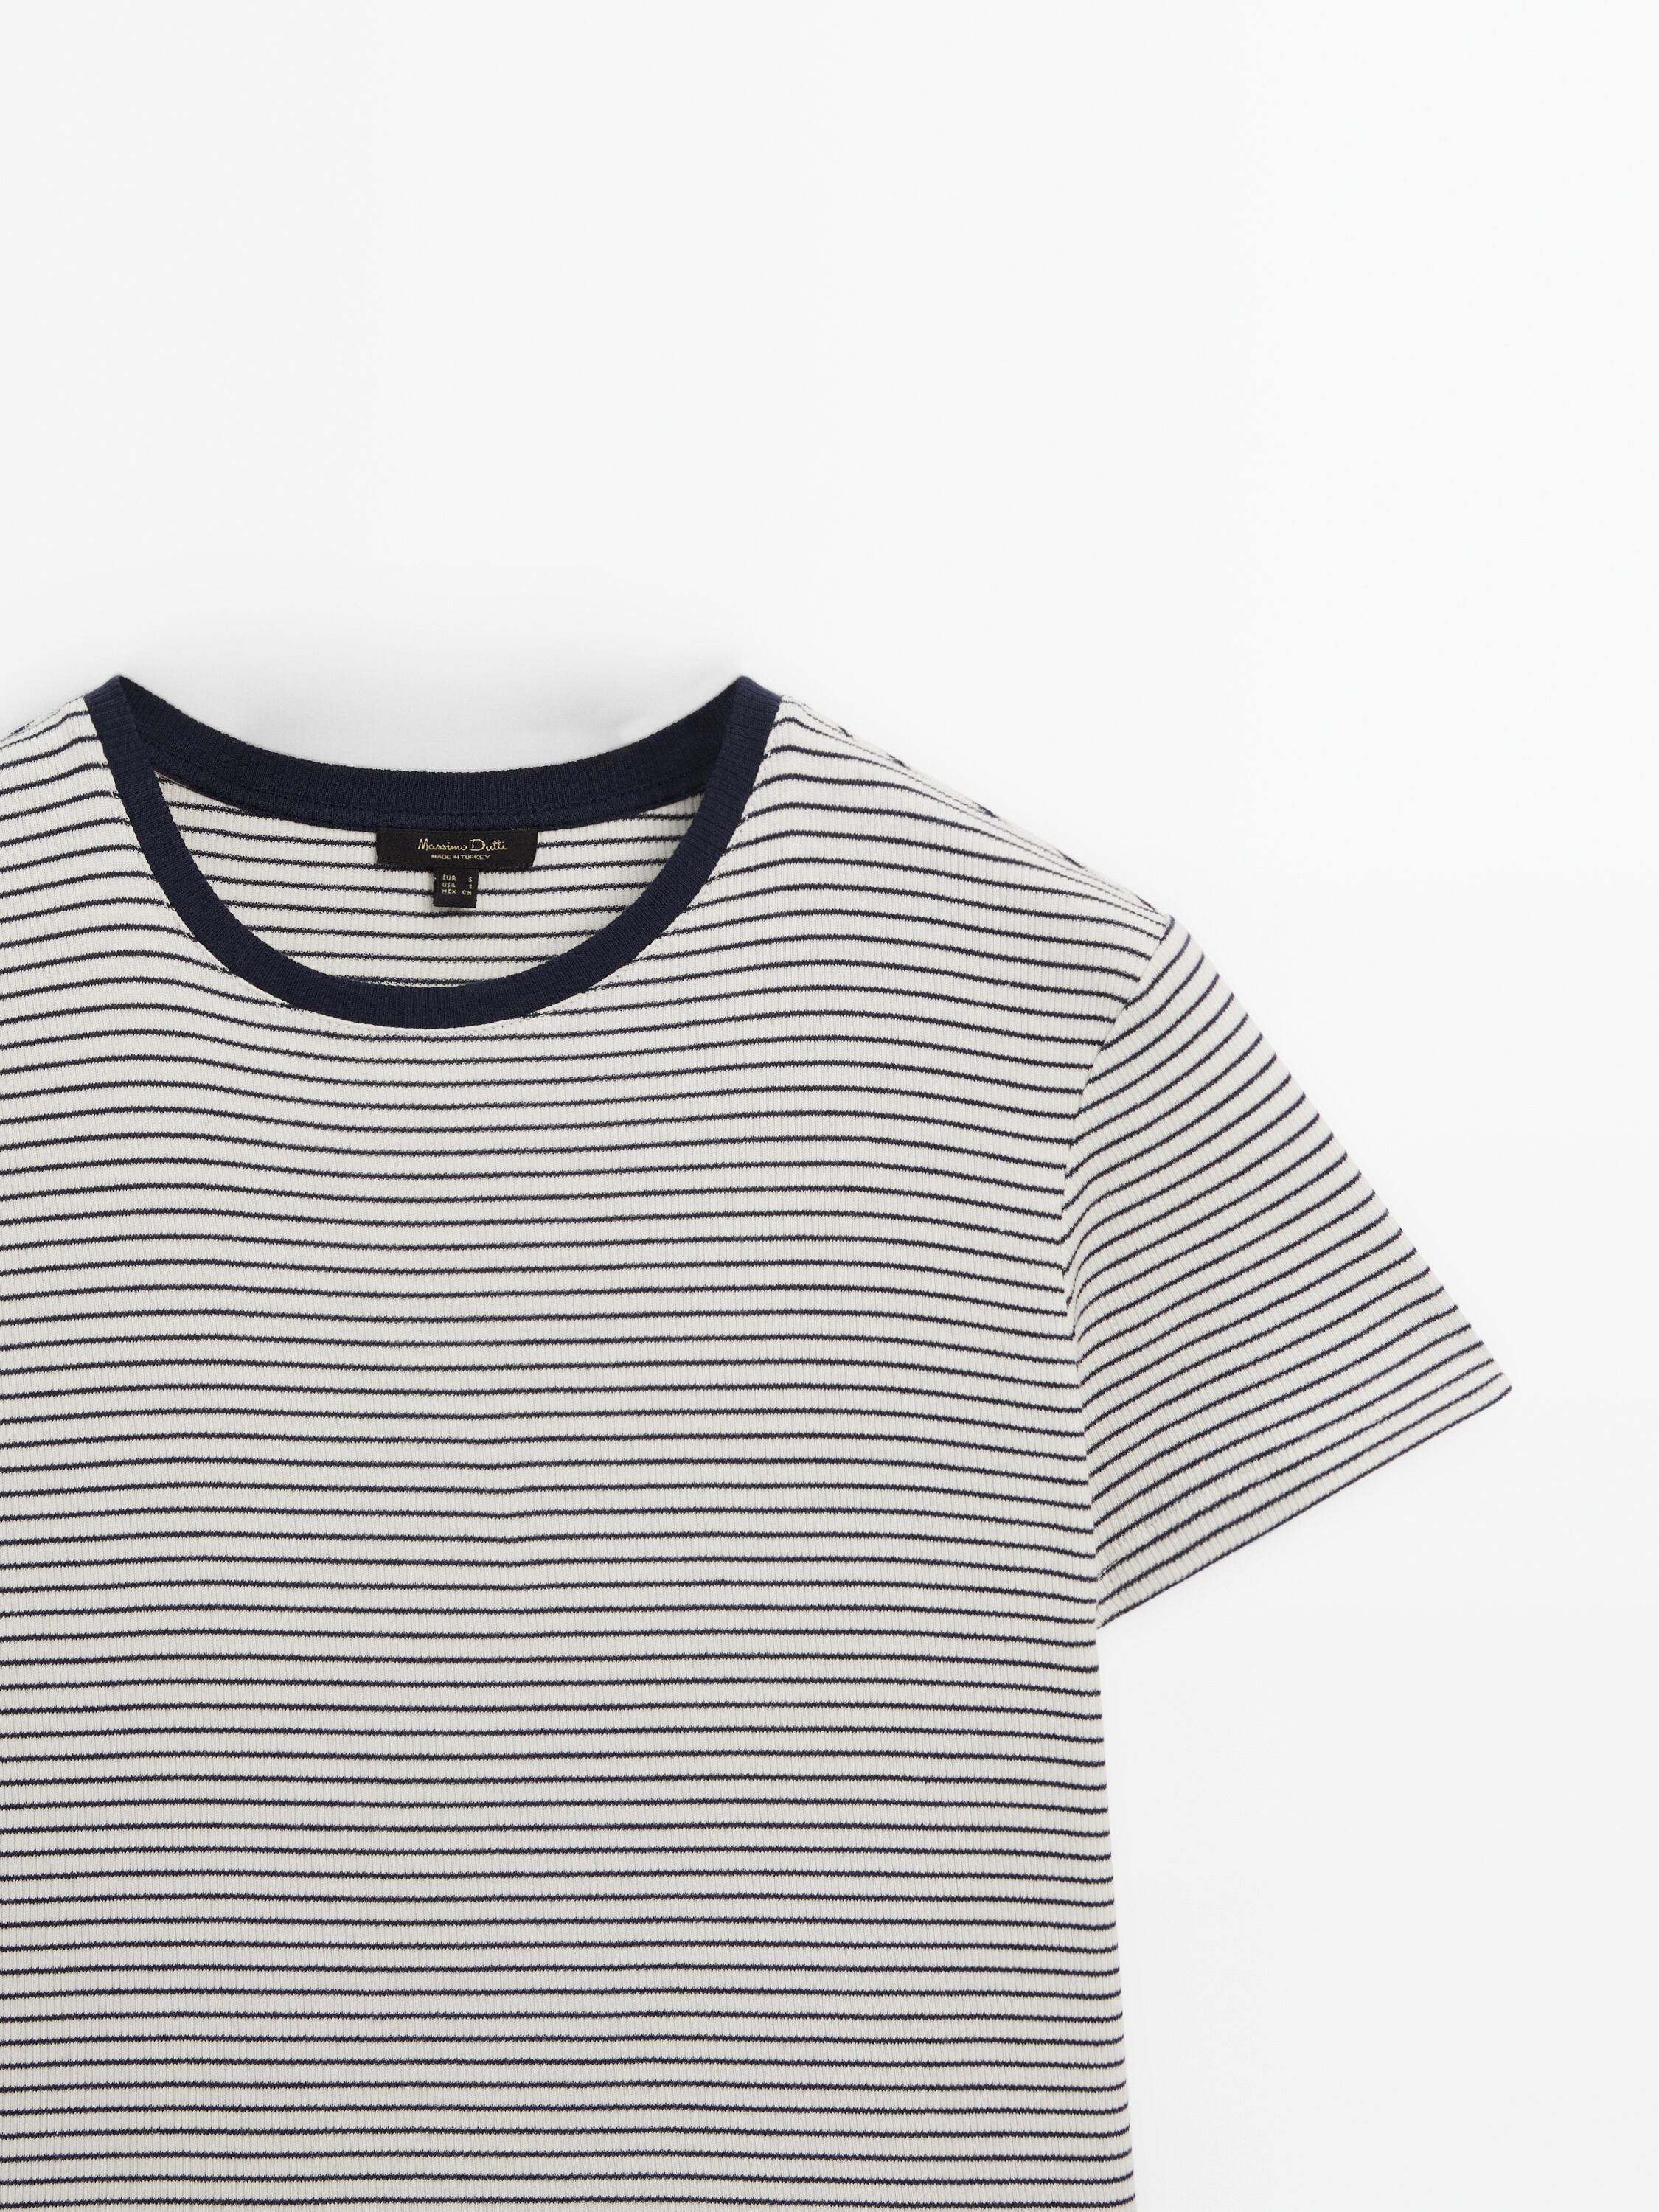 Striped cotton T-shirt with contrast neckline